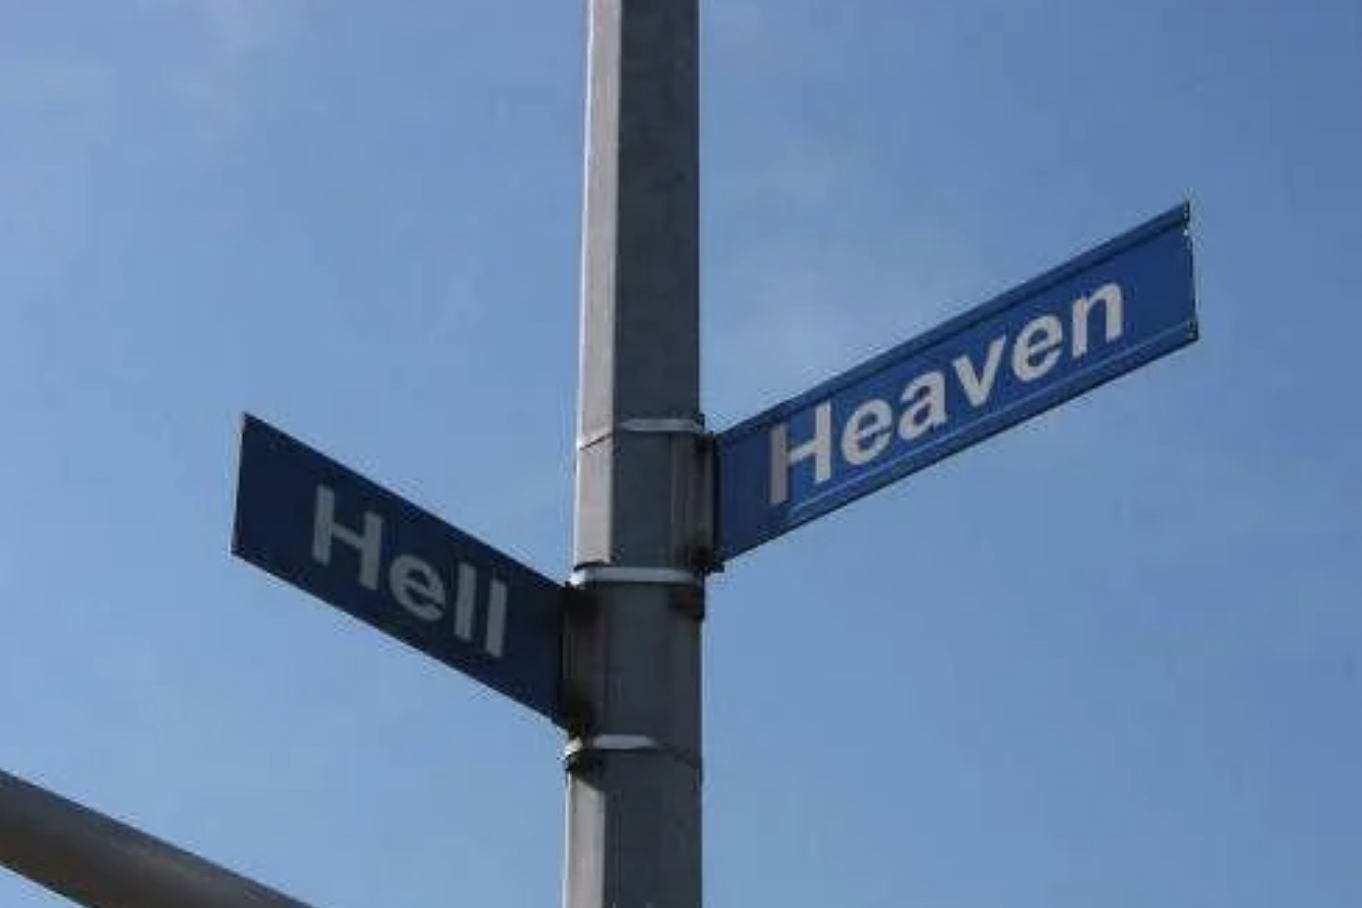 Street signs at an intersection labeled &quot;Heaven&quot; and &quot;Hell&quot; against a clear sky